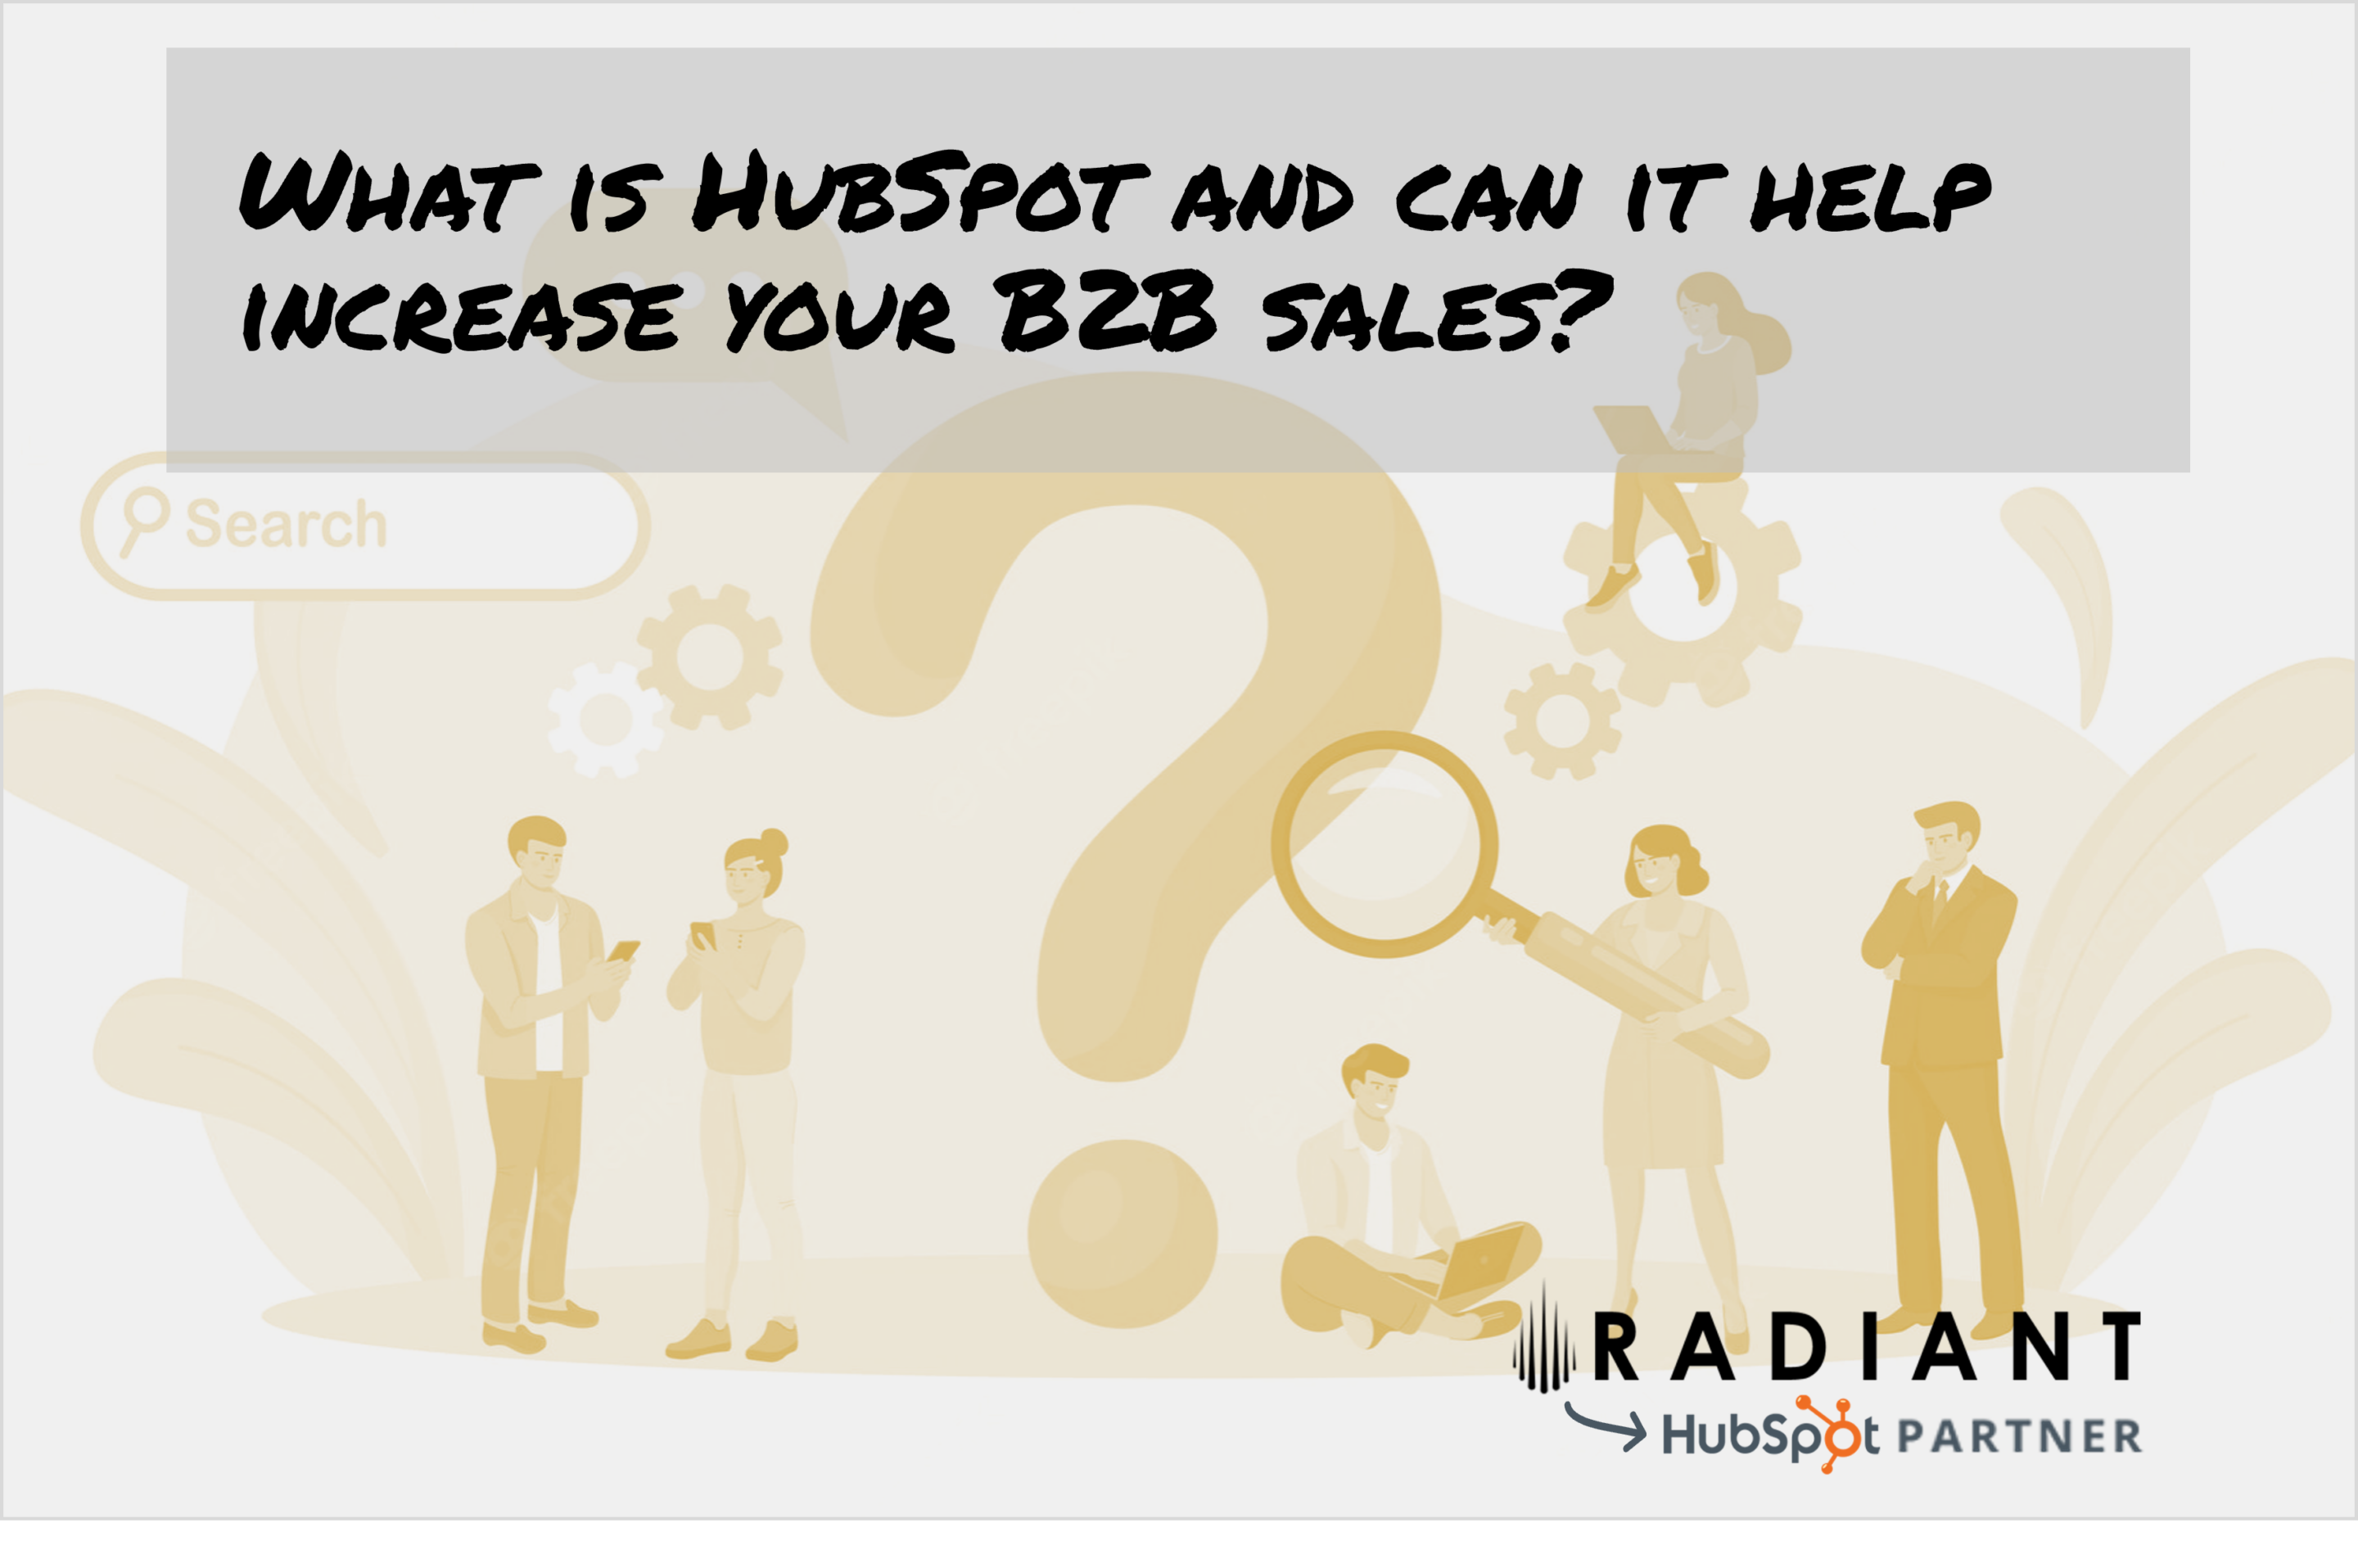 HubSpot is a digital platform integrating CRM, marketing, sales, service and more so you can adapt to the buyers journey of the future.